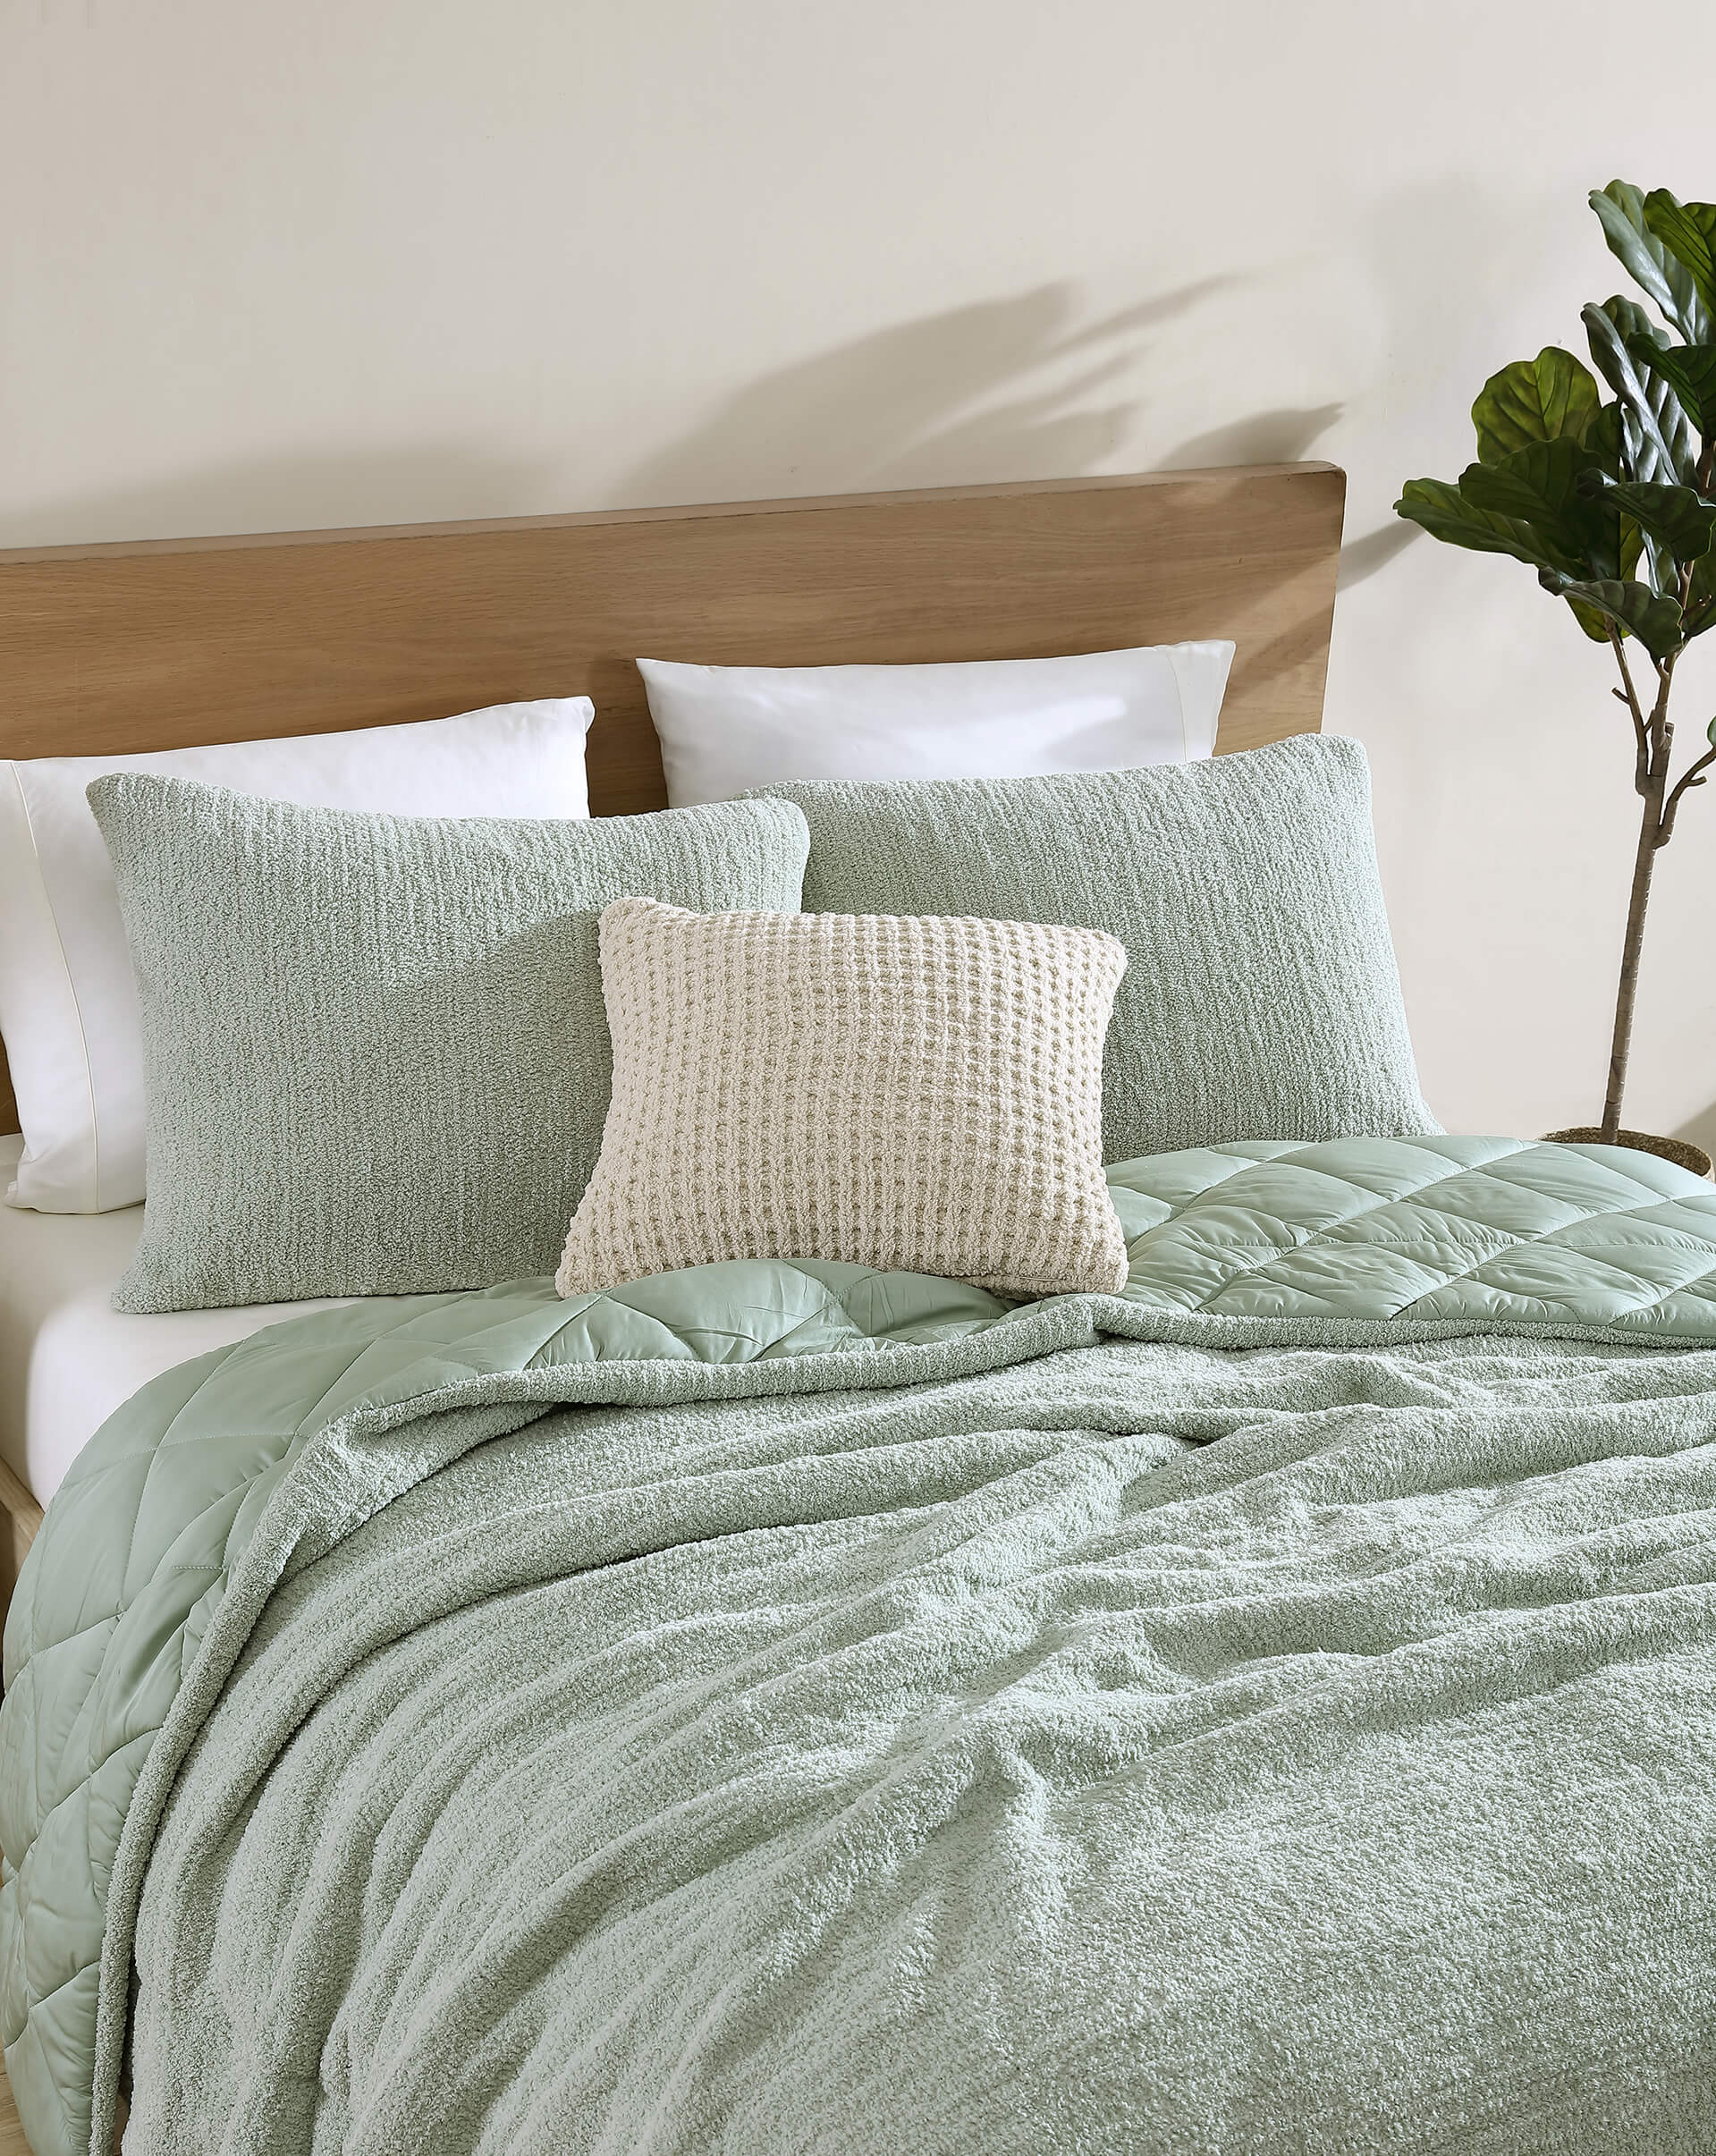 What is a Pillow Sham? Sunday Citizen's Snug Comforter in Sage. Snug Sham Set in Sage. Snug Waffle Throw Pillow in Sahara Tan. Simple bed with five throw pillows and green bedding. Soft, green bedding and pillows.